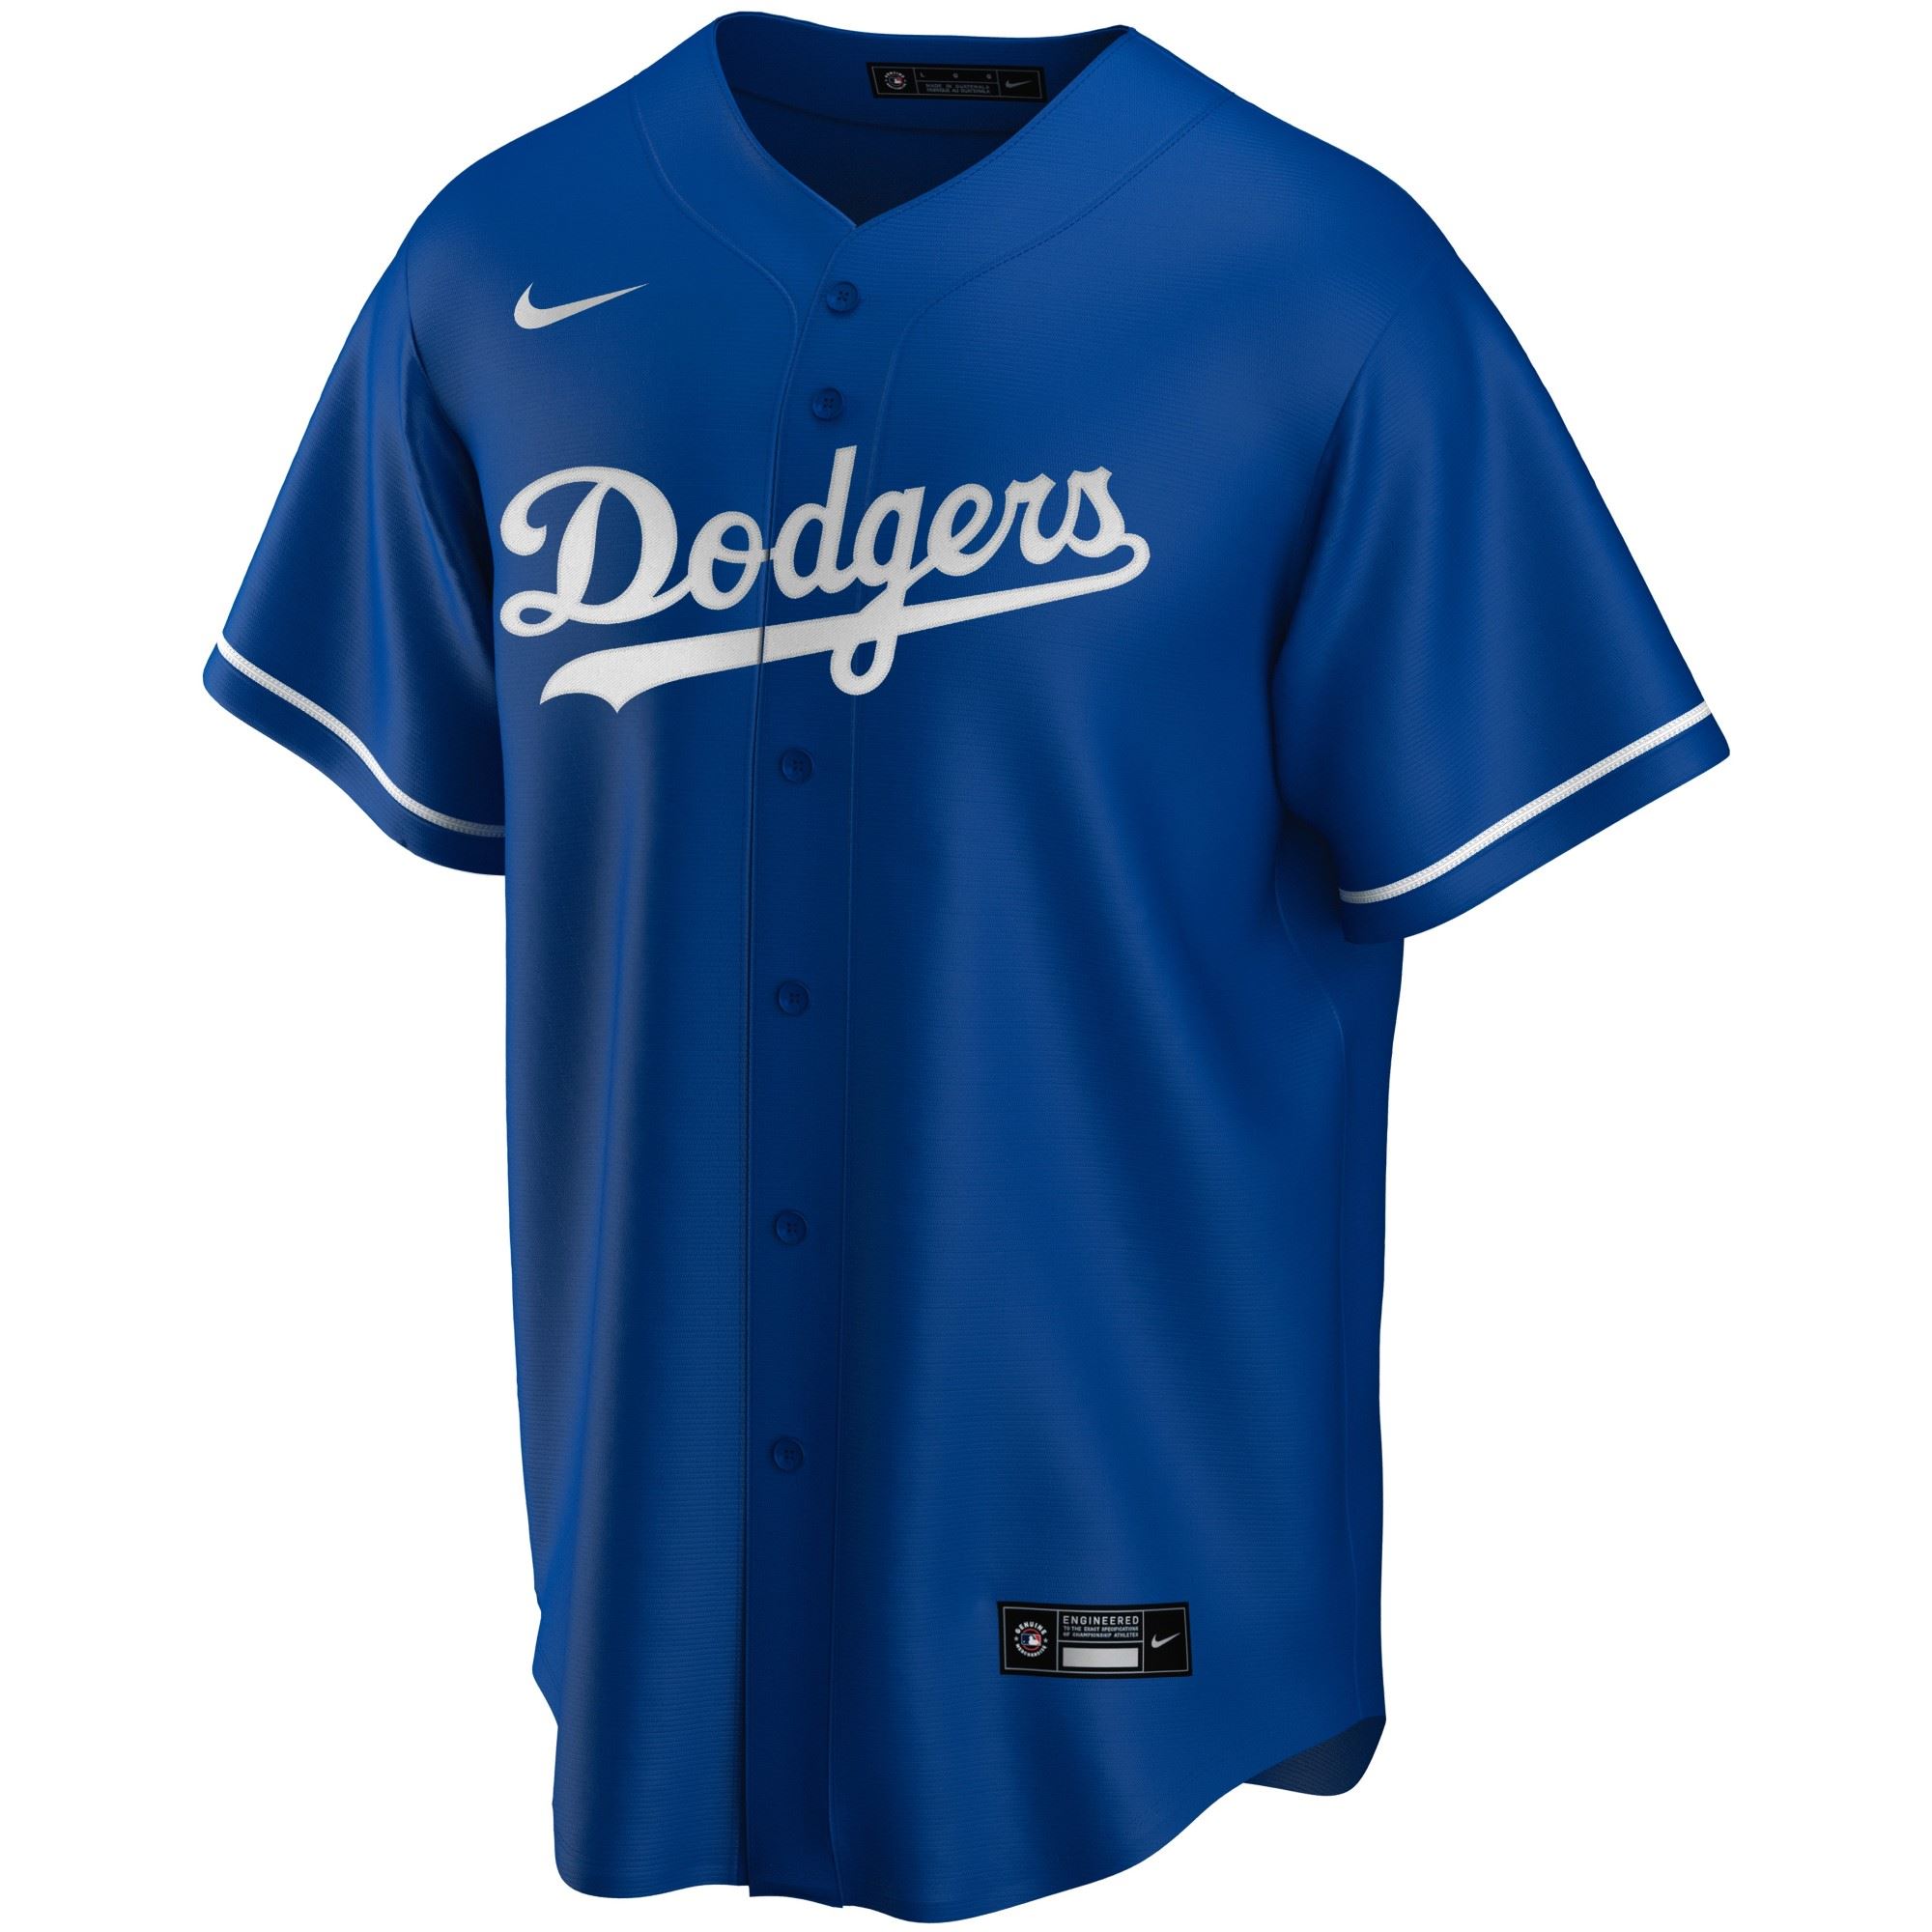 Los Angeles Dodgers Official MLB Replica Alternate Jersey Royal Nike